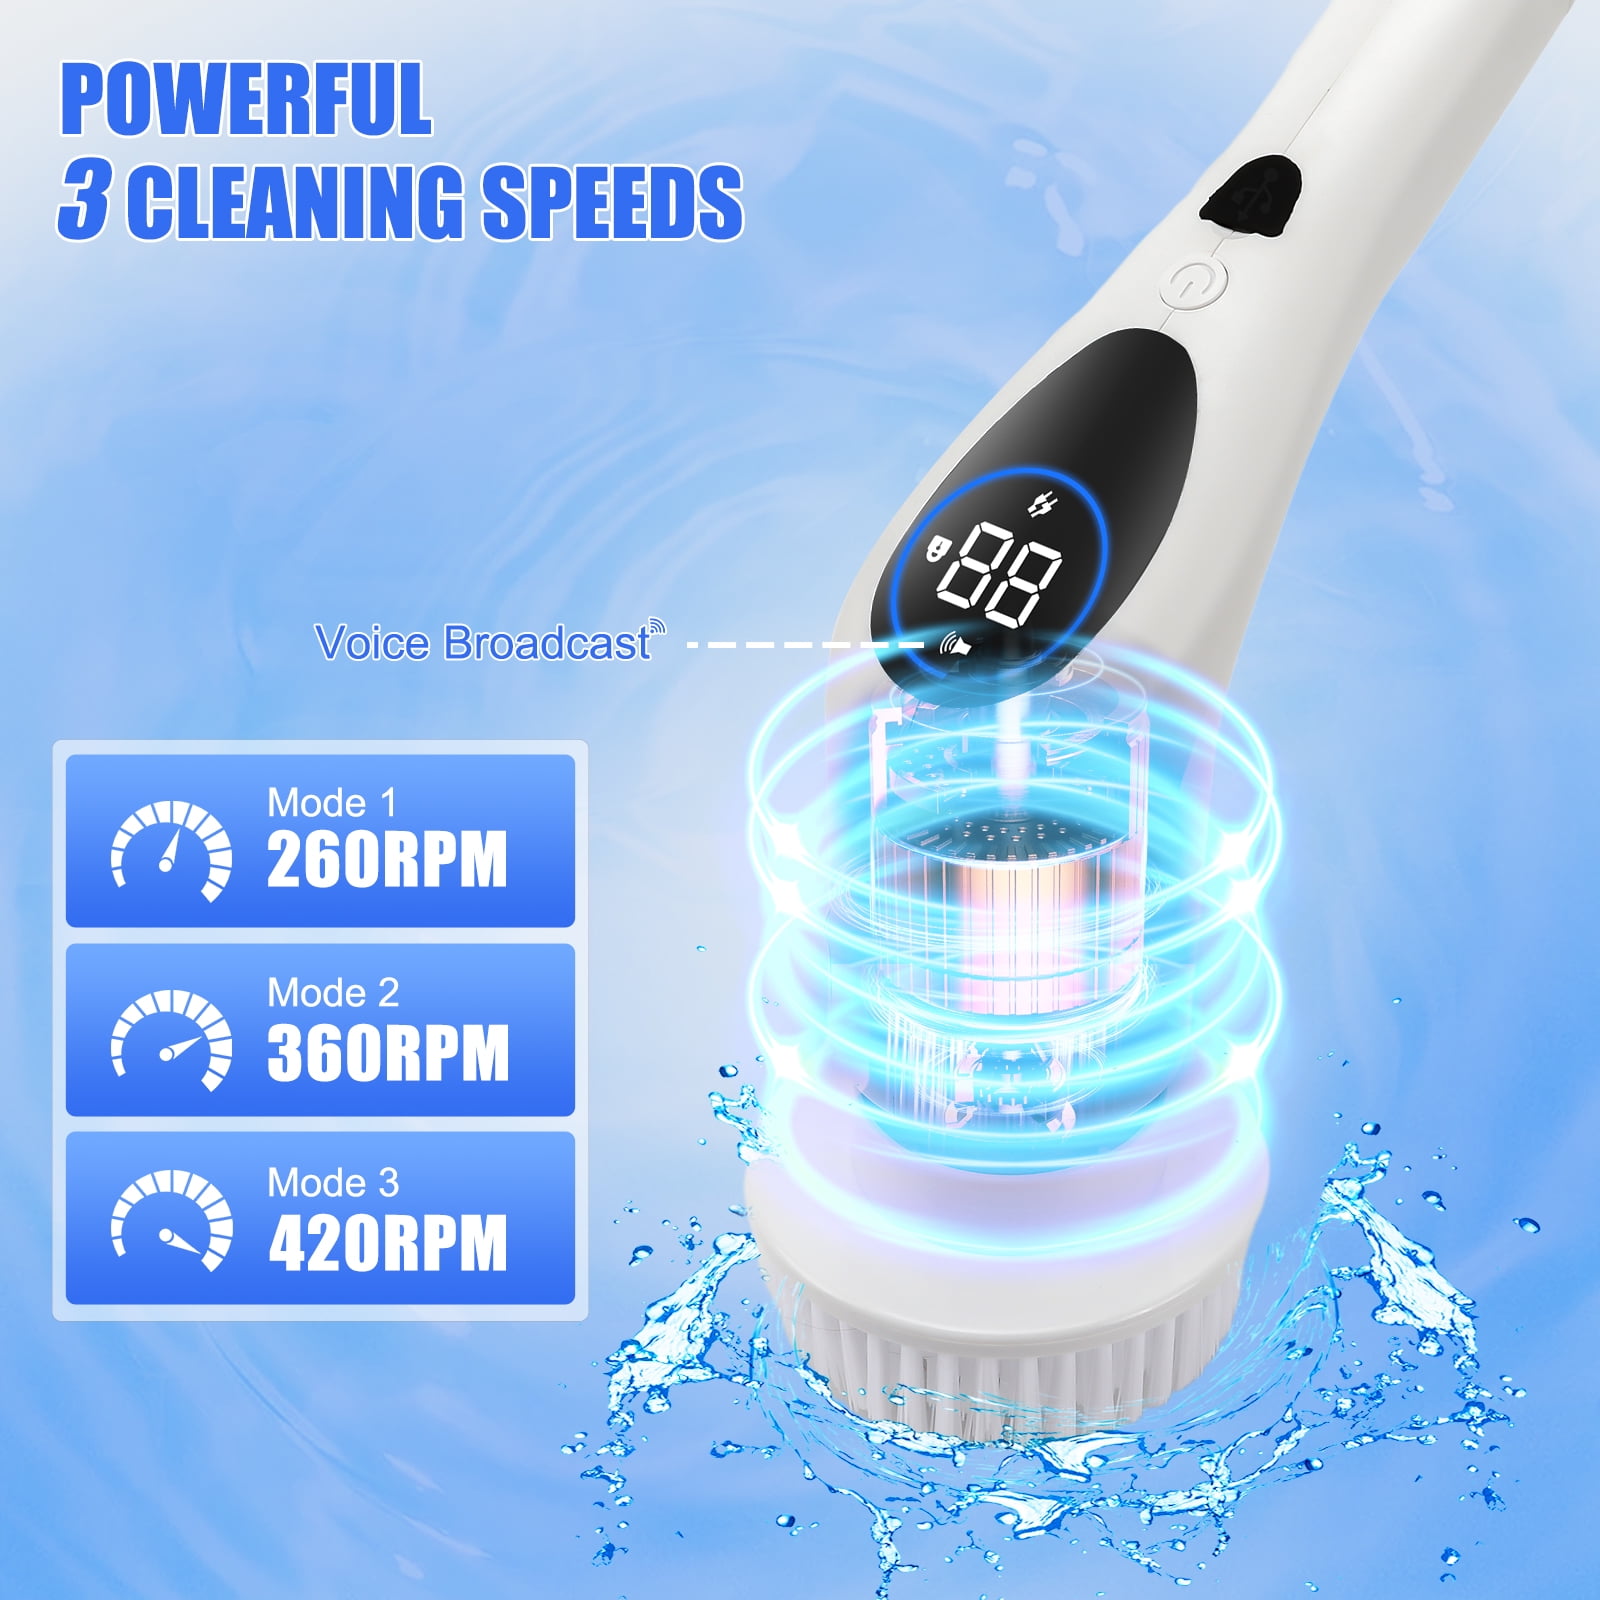 3 Heads Electric Cleaning Brush Head Turbo Scrub Handheld 360° For